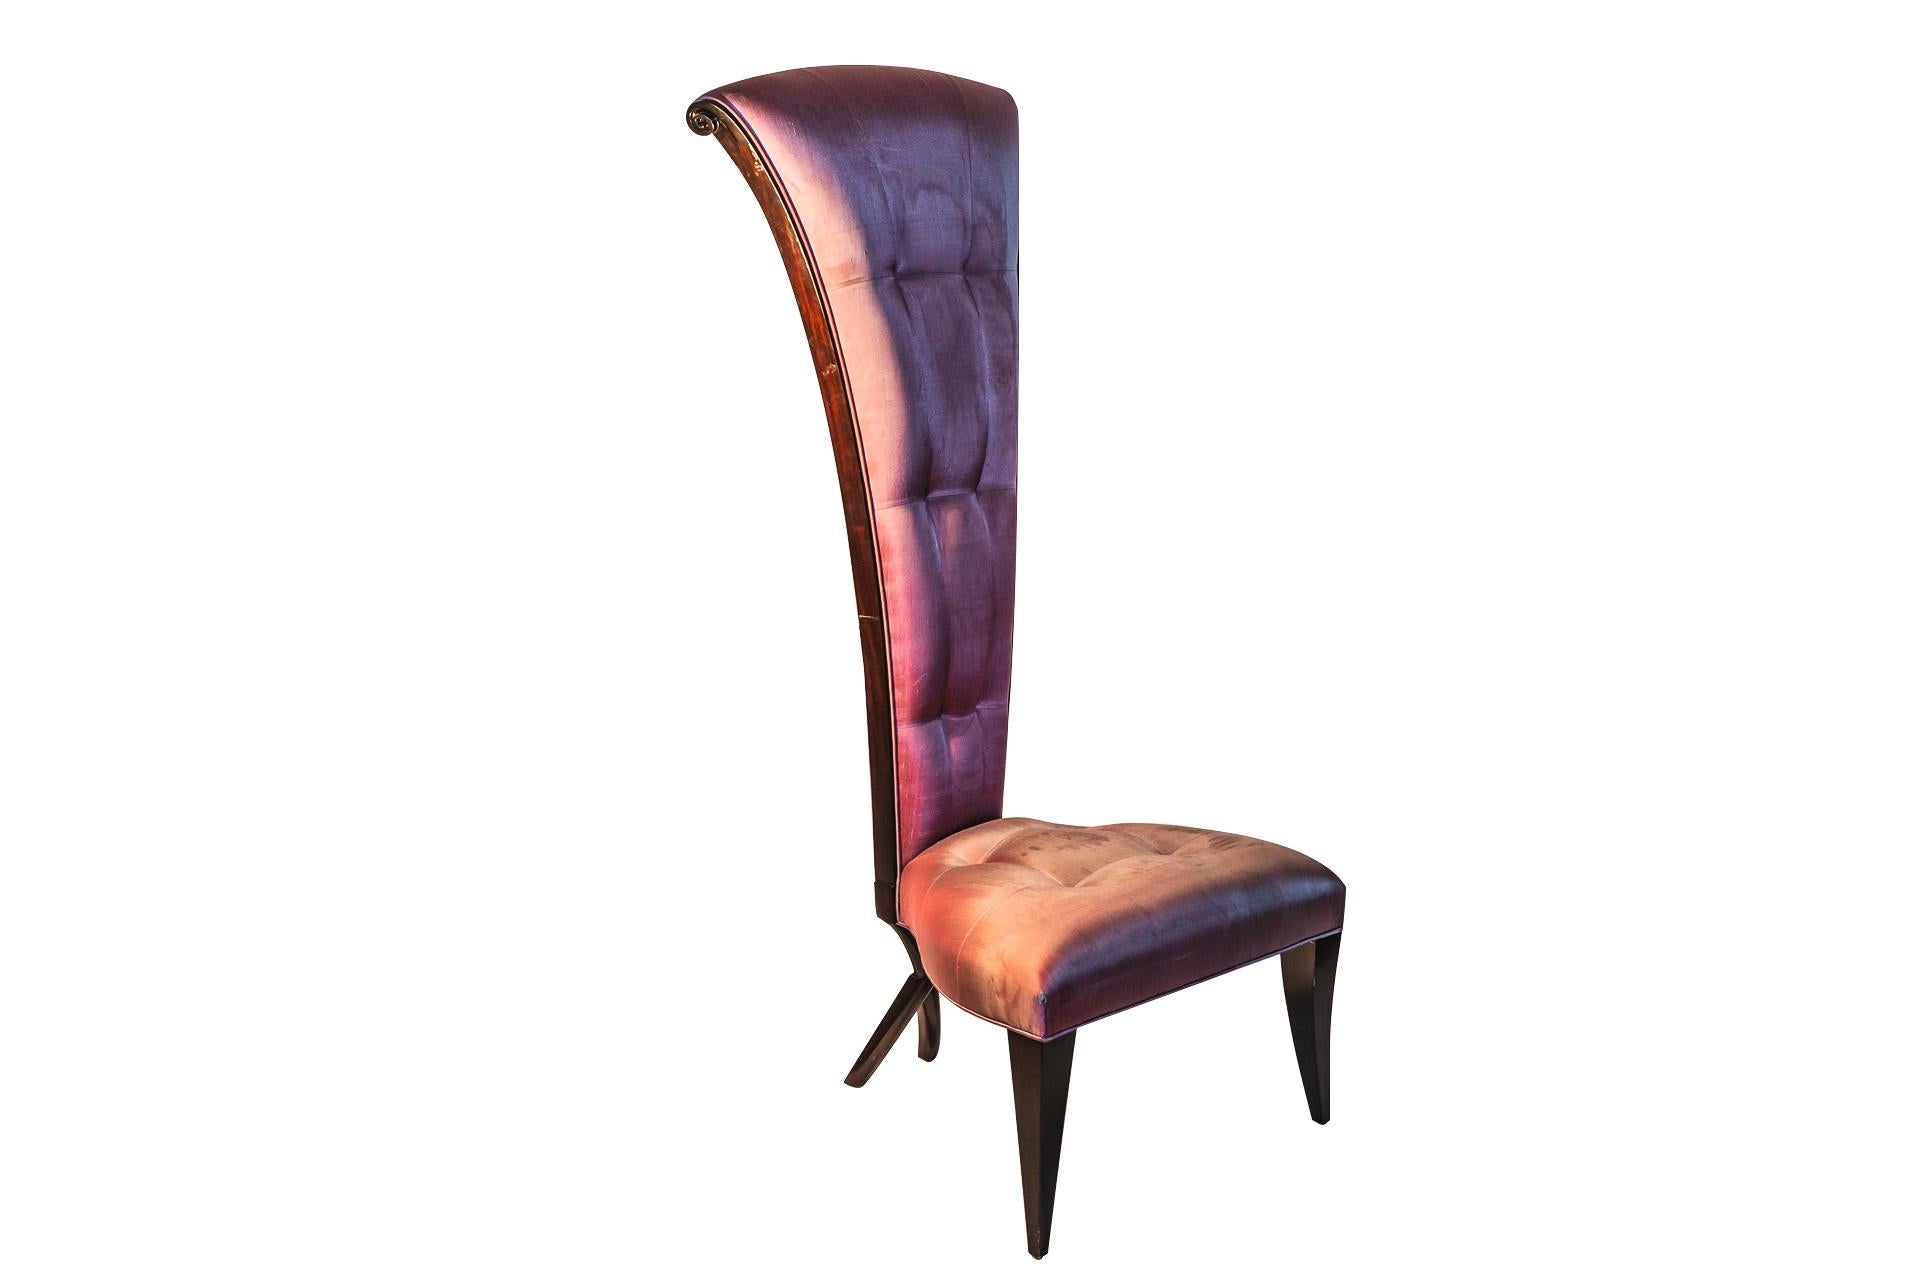 Christopher Guy (1960-2020), Tall chair,
High curved roll-up backrest, curved front legs,
X-shaped posterior base,
Padded raspberry velvet trim,
Upholstery to be redone,
England, circa 1990.

Measures: Height 160 cm, width 66 cm, depth 66 cm, seat